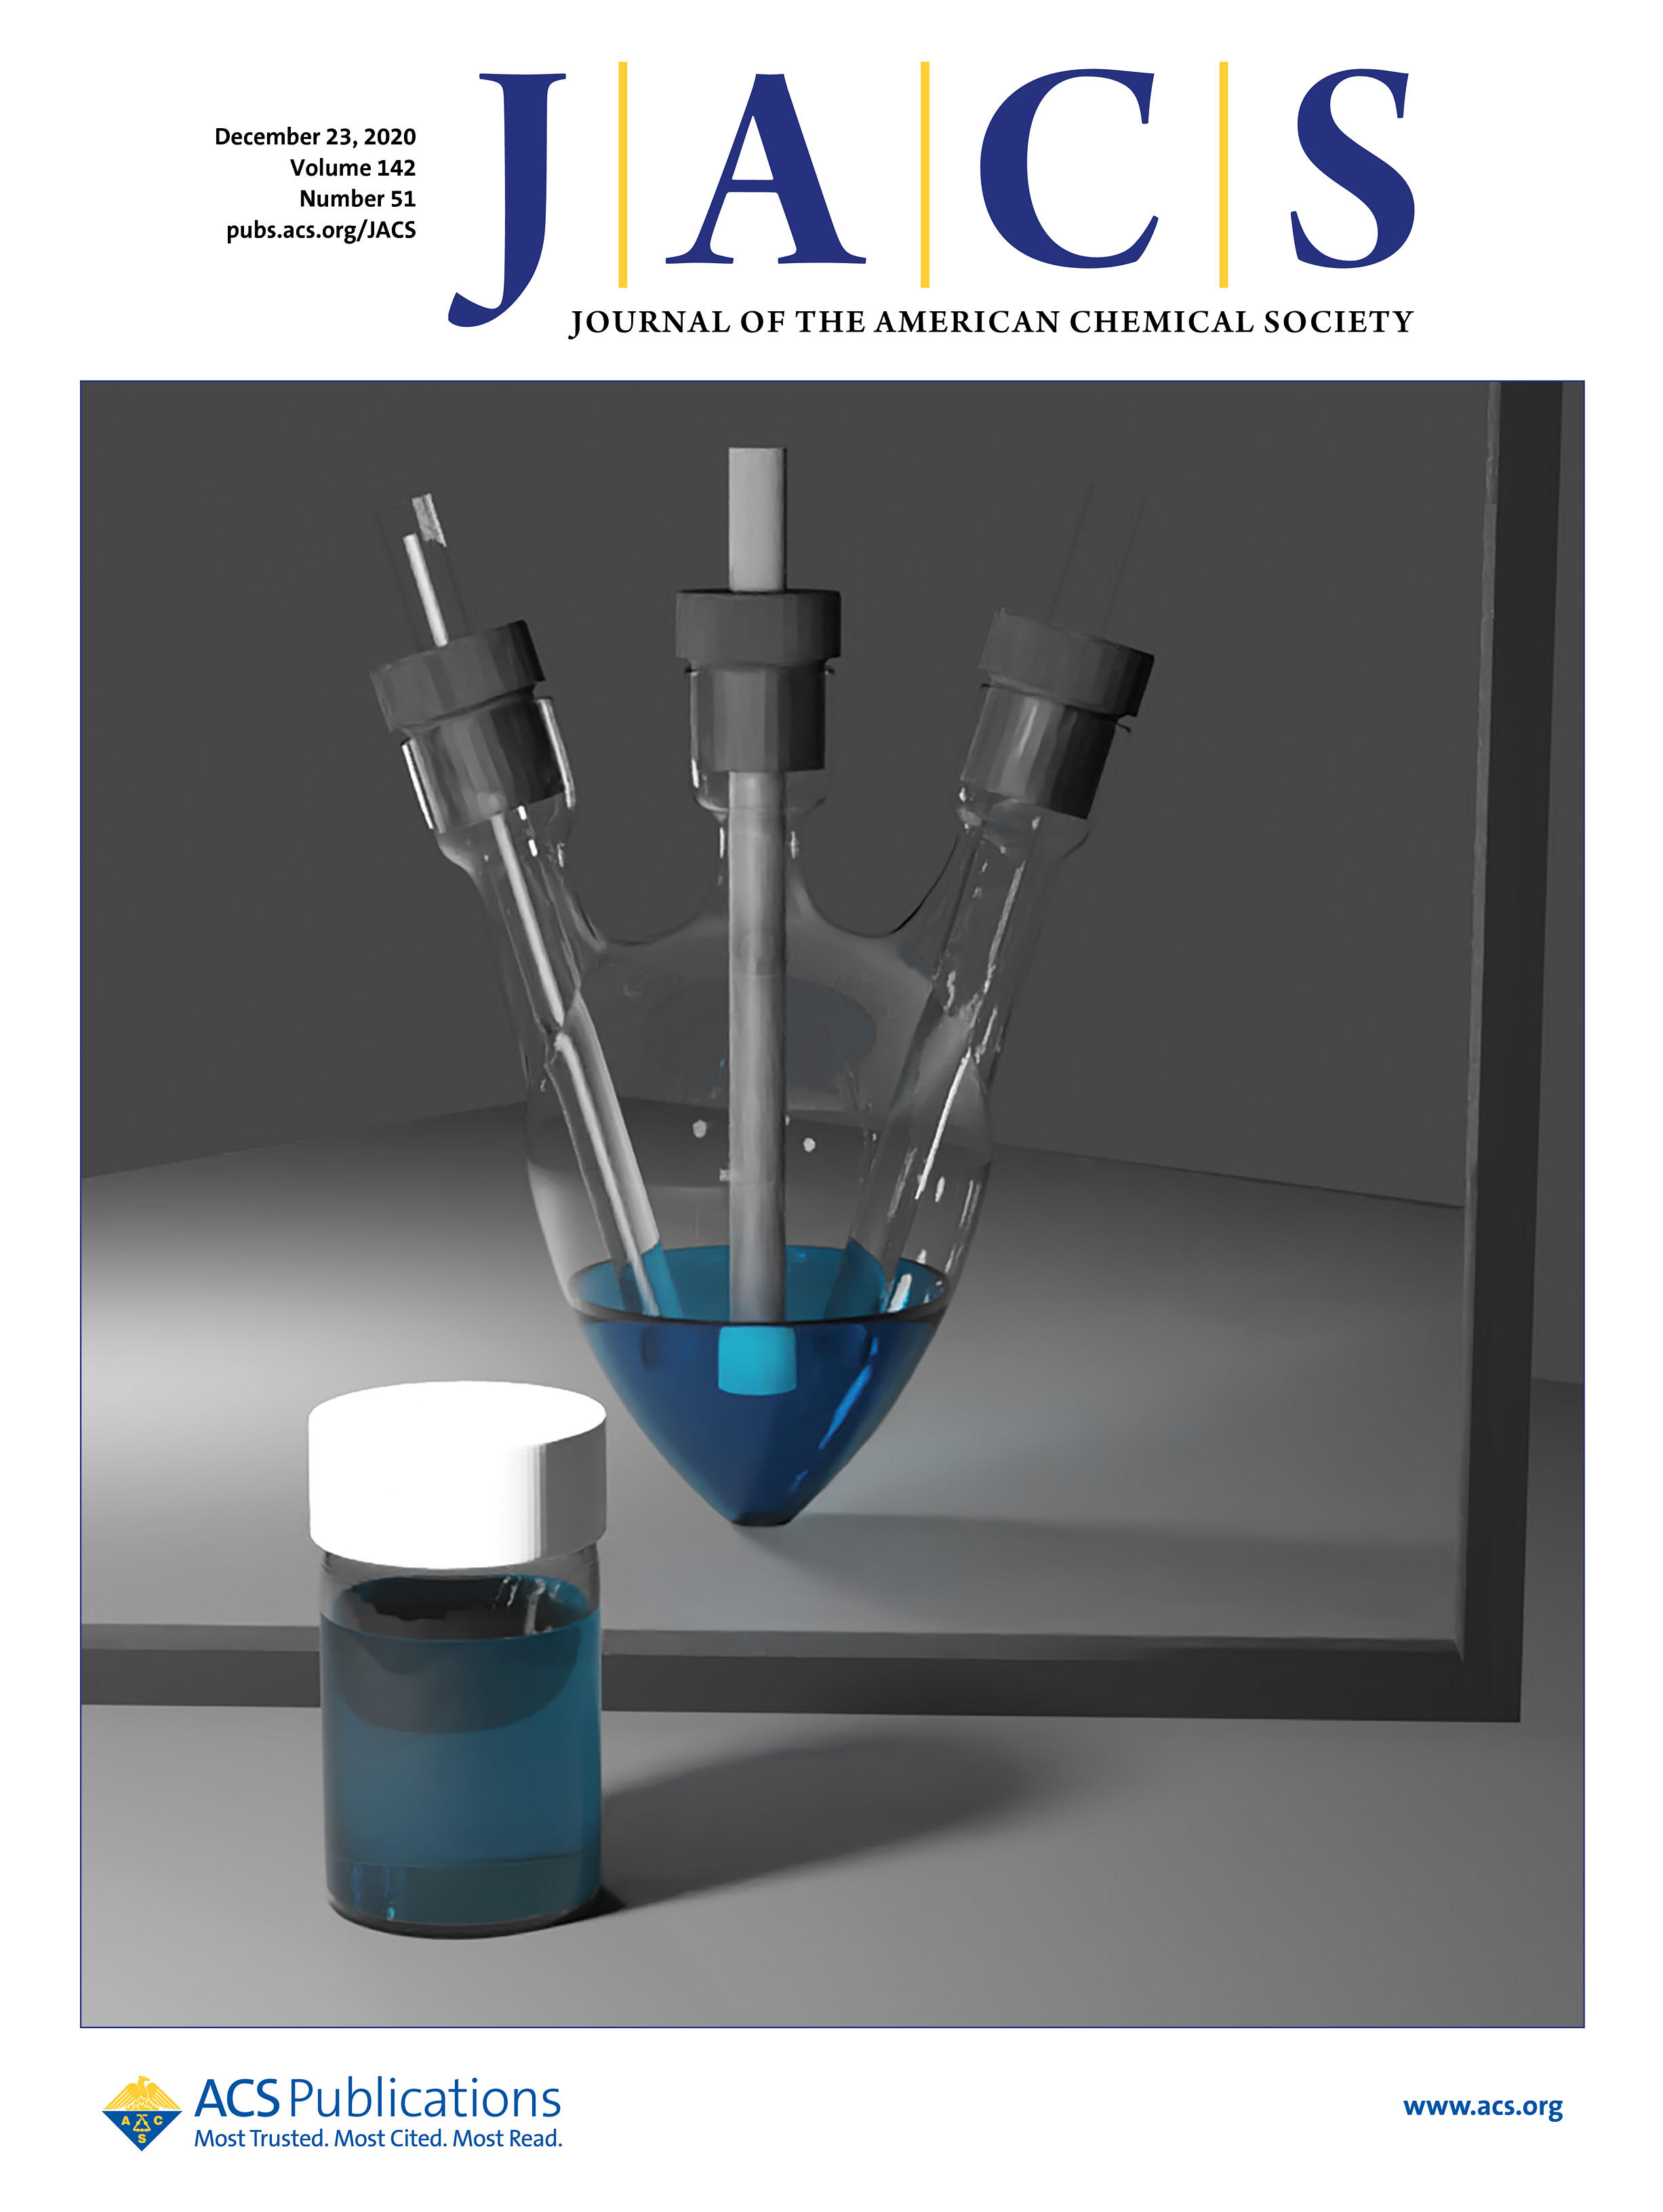 Journal cover showing a vial in the foreground and an electrochemical cell as a reflection in a mirror